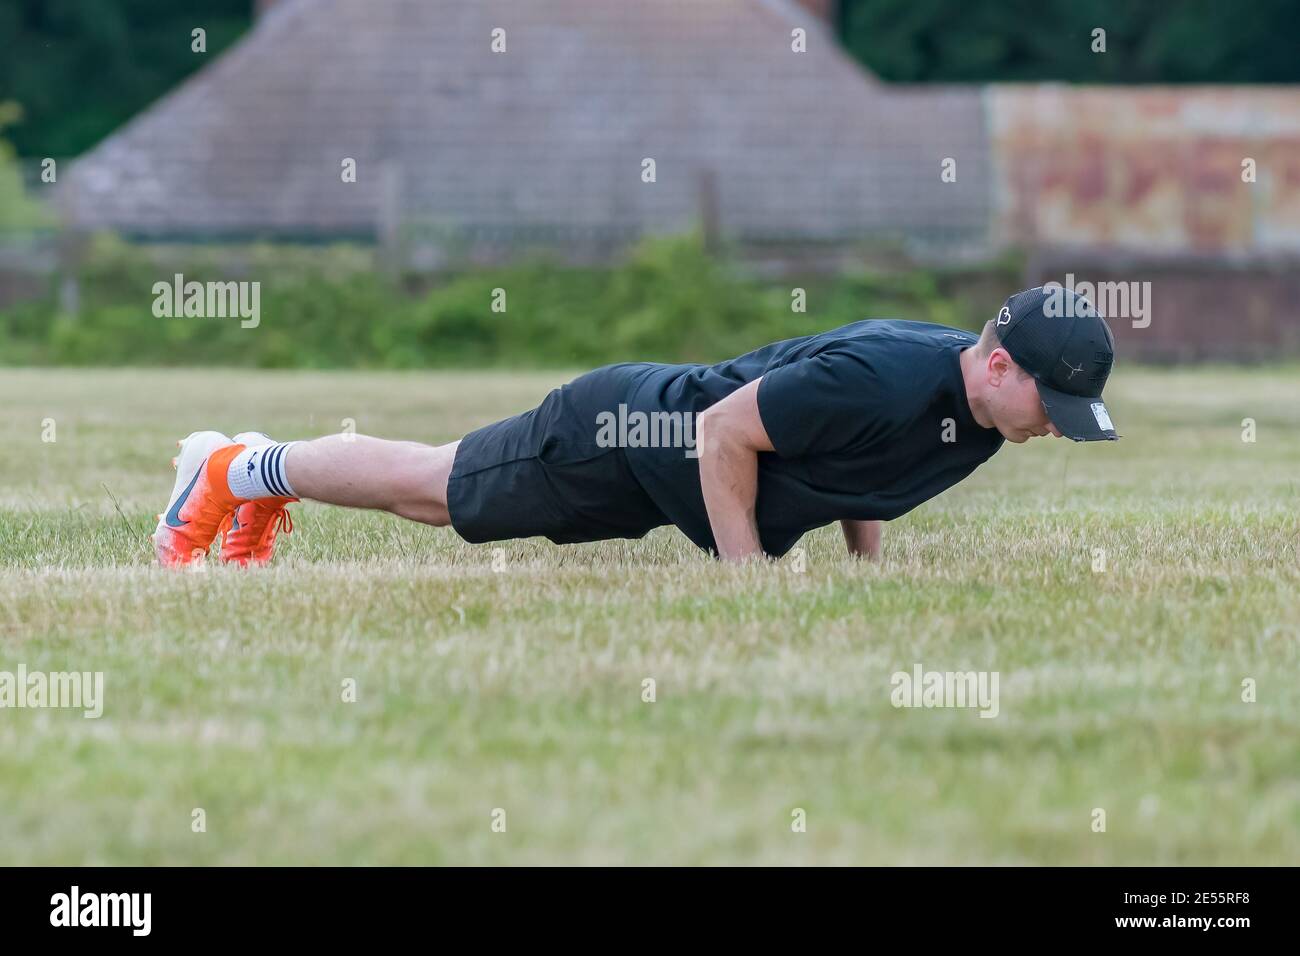 Young man (20s) planking on grass pitch, holding his body horizontal on his hands and toes. Stock Photo